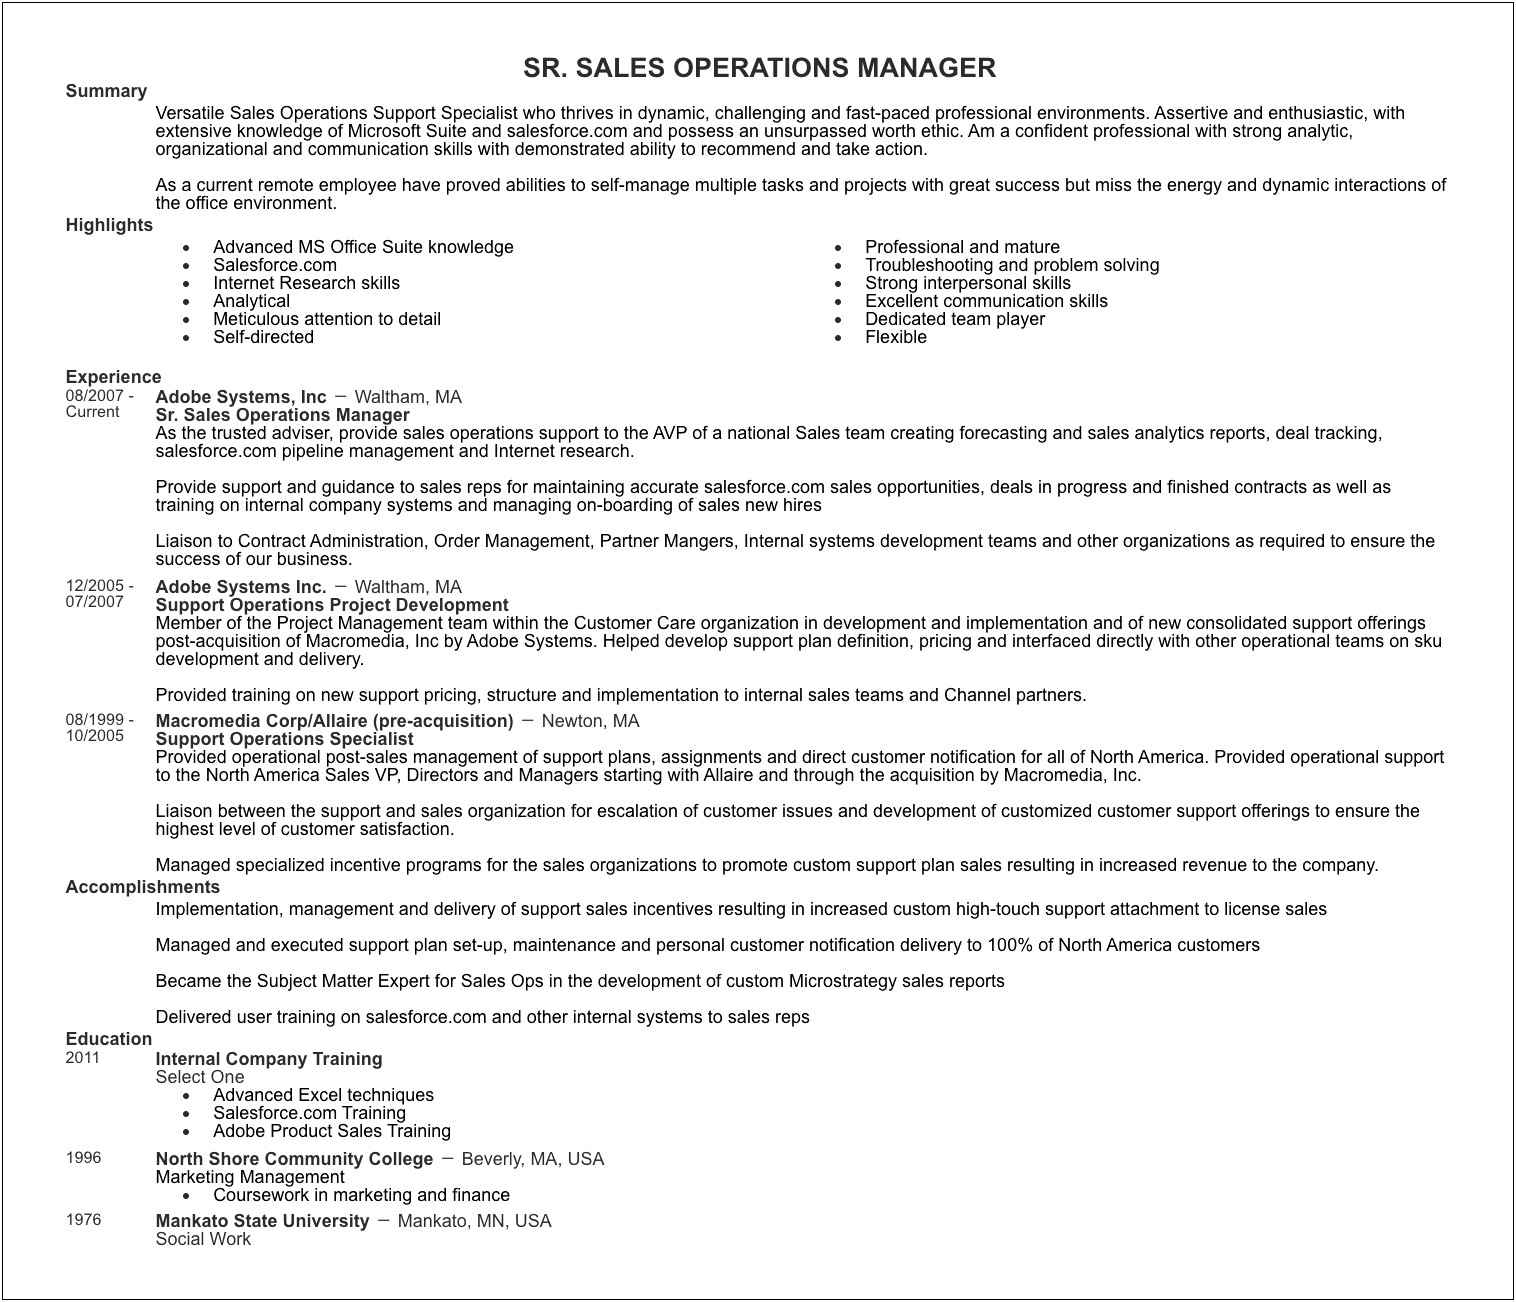 Resume Summary Examples For Support Specialist